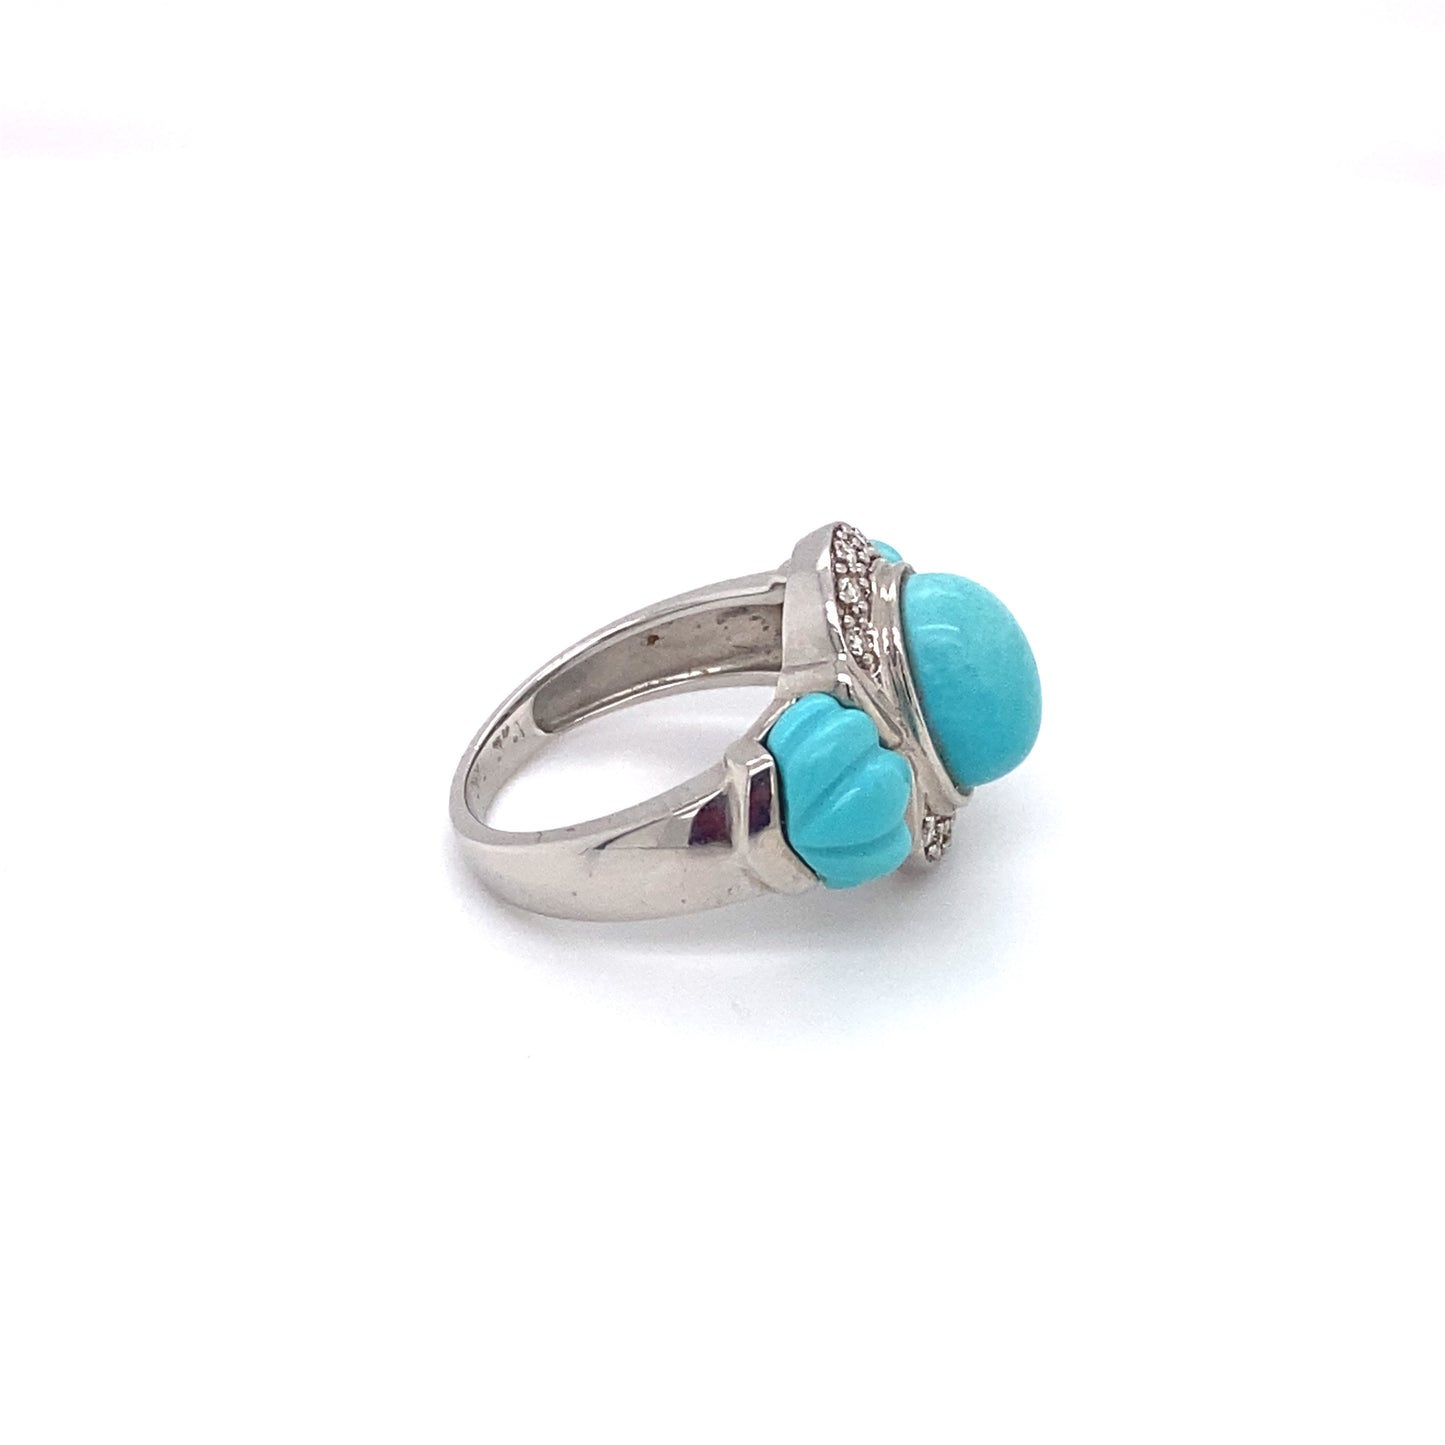 Vintage 14K White Gold Turquoise and Diamond Ring